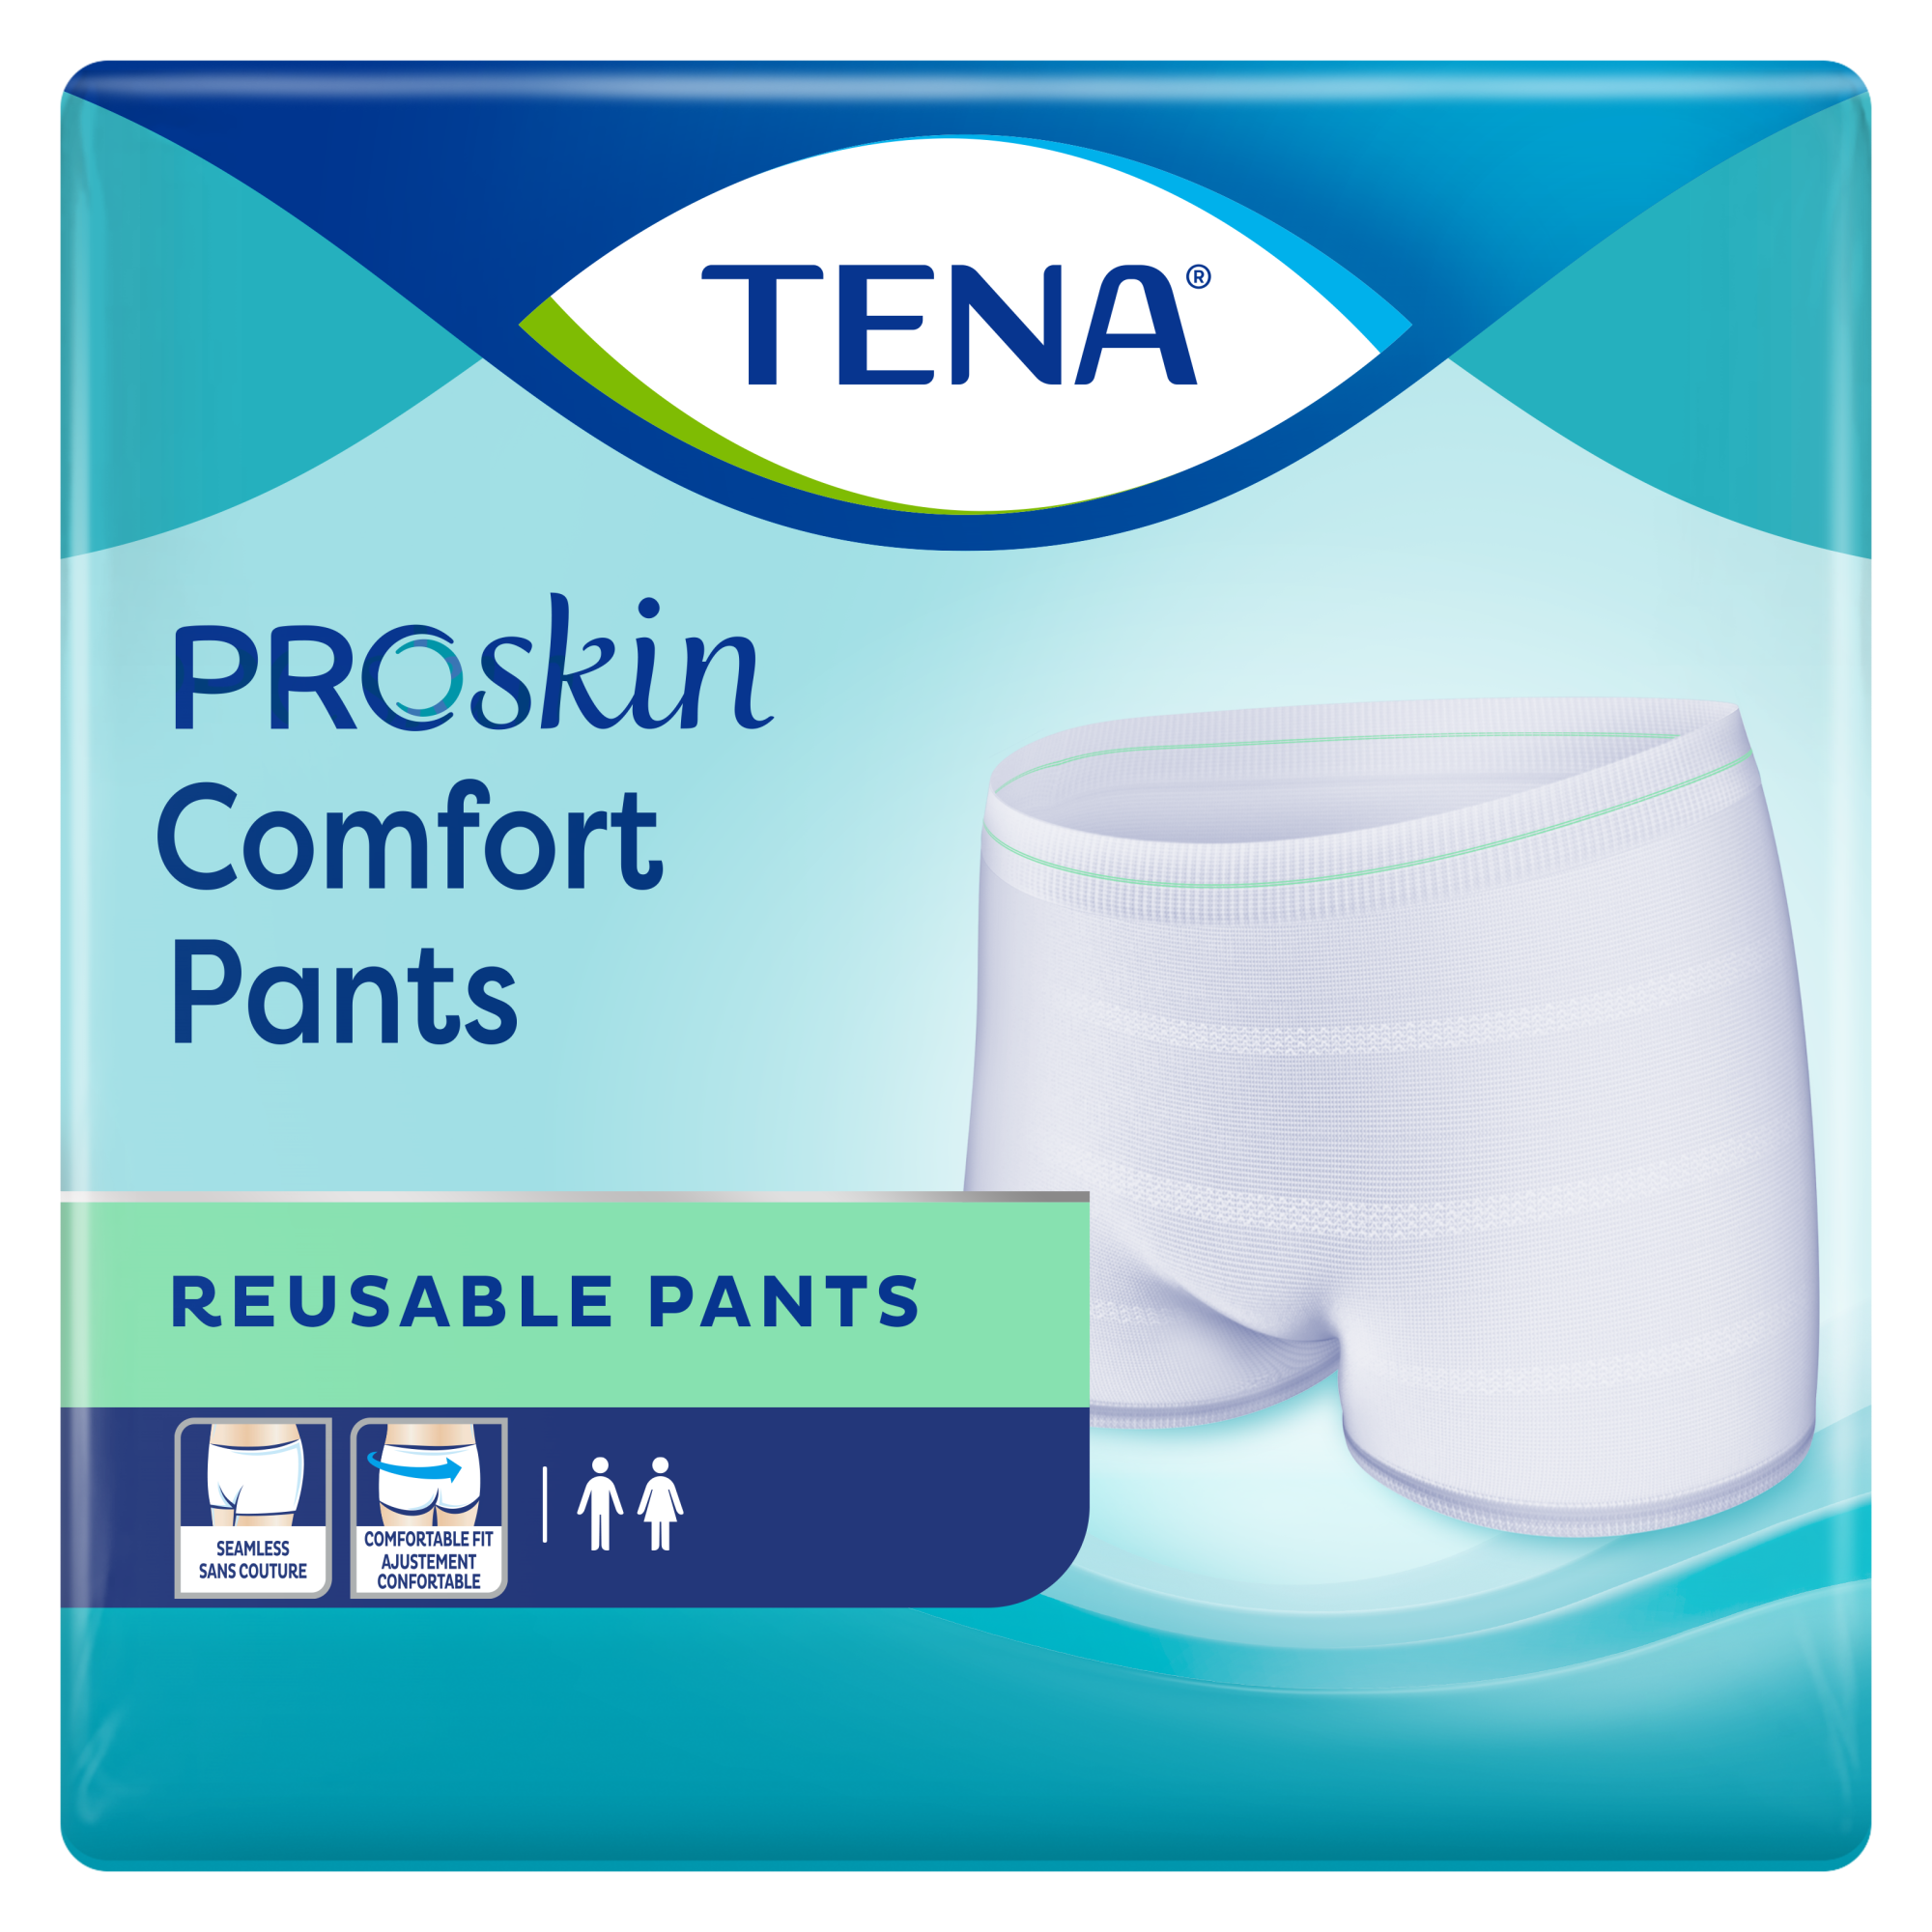 TENA Canada Free Sample Kits for Men and Women! - Canadian